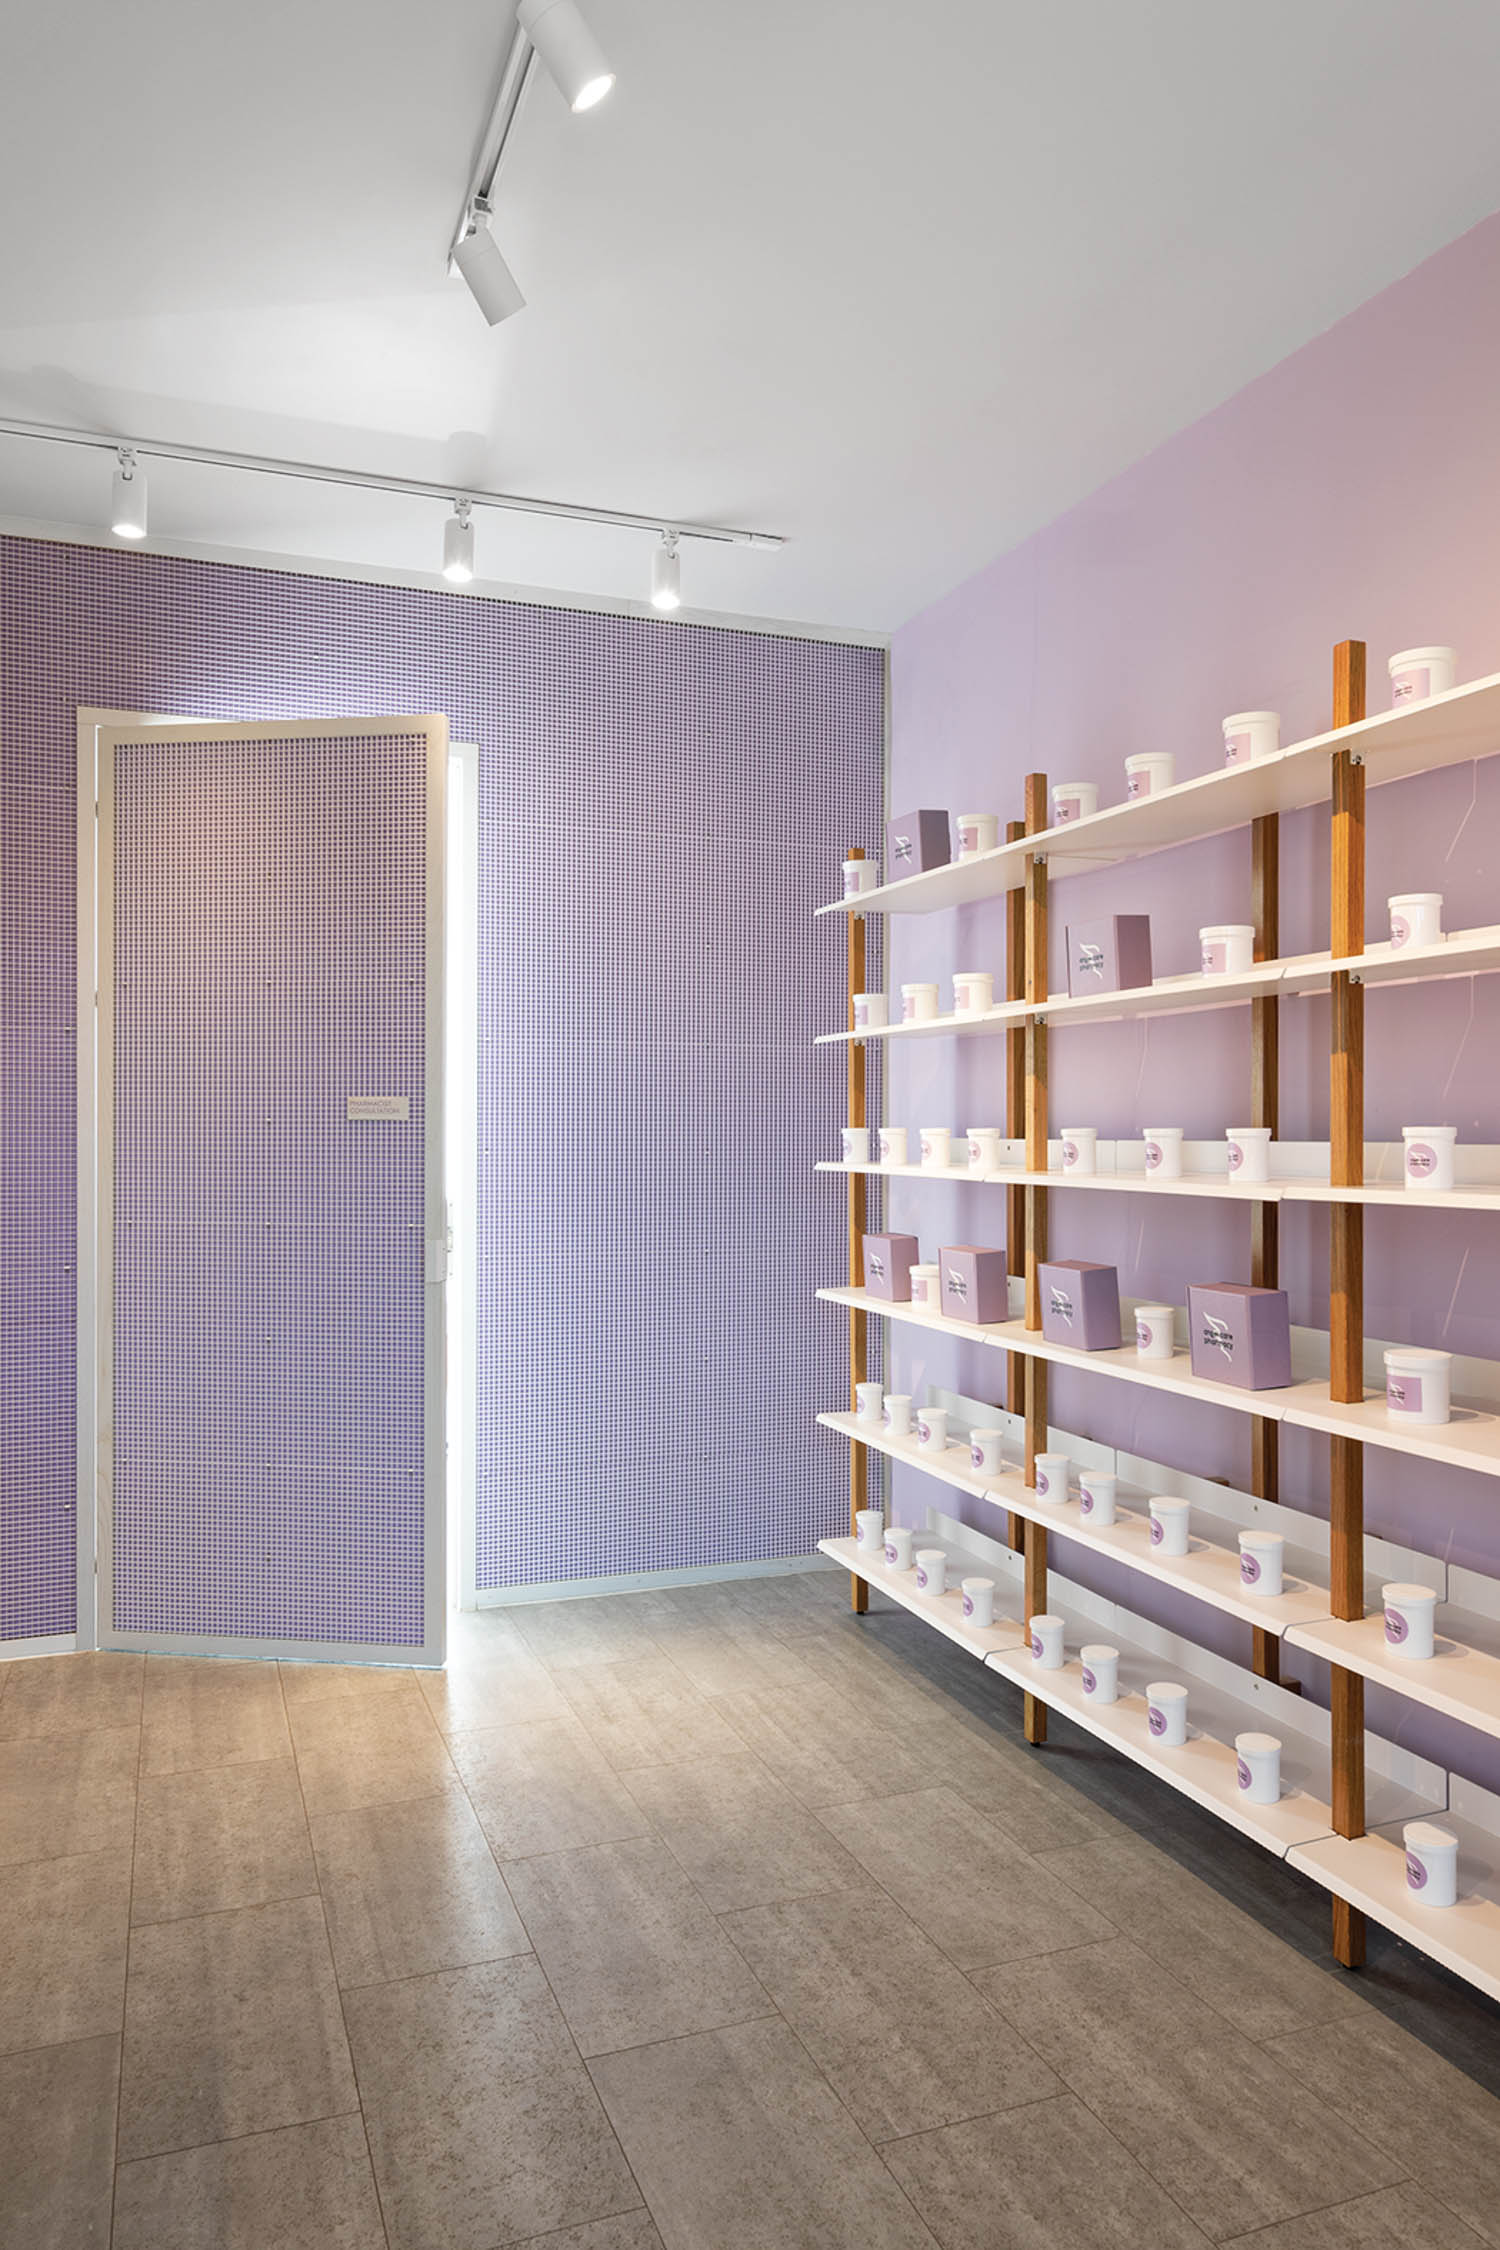 purple walls are the background behind shelving in this pharmacy